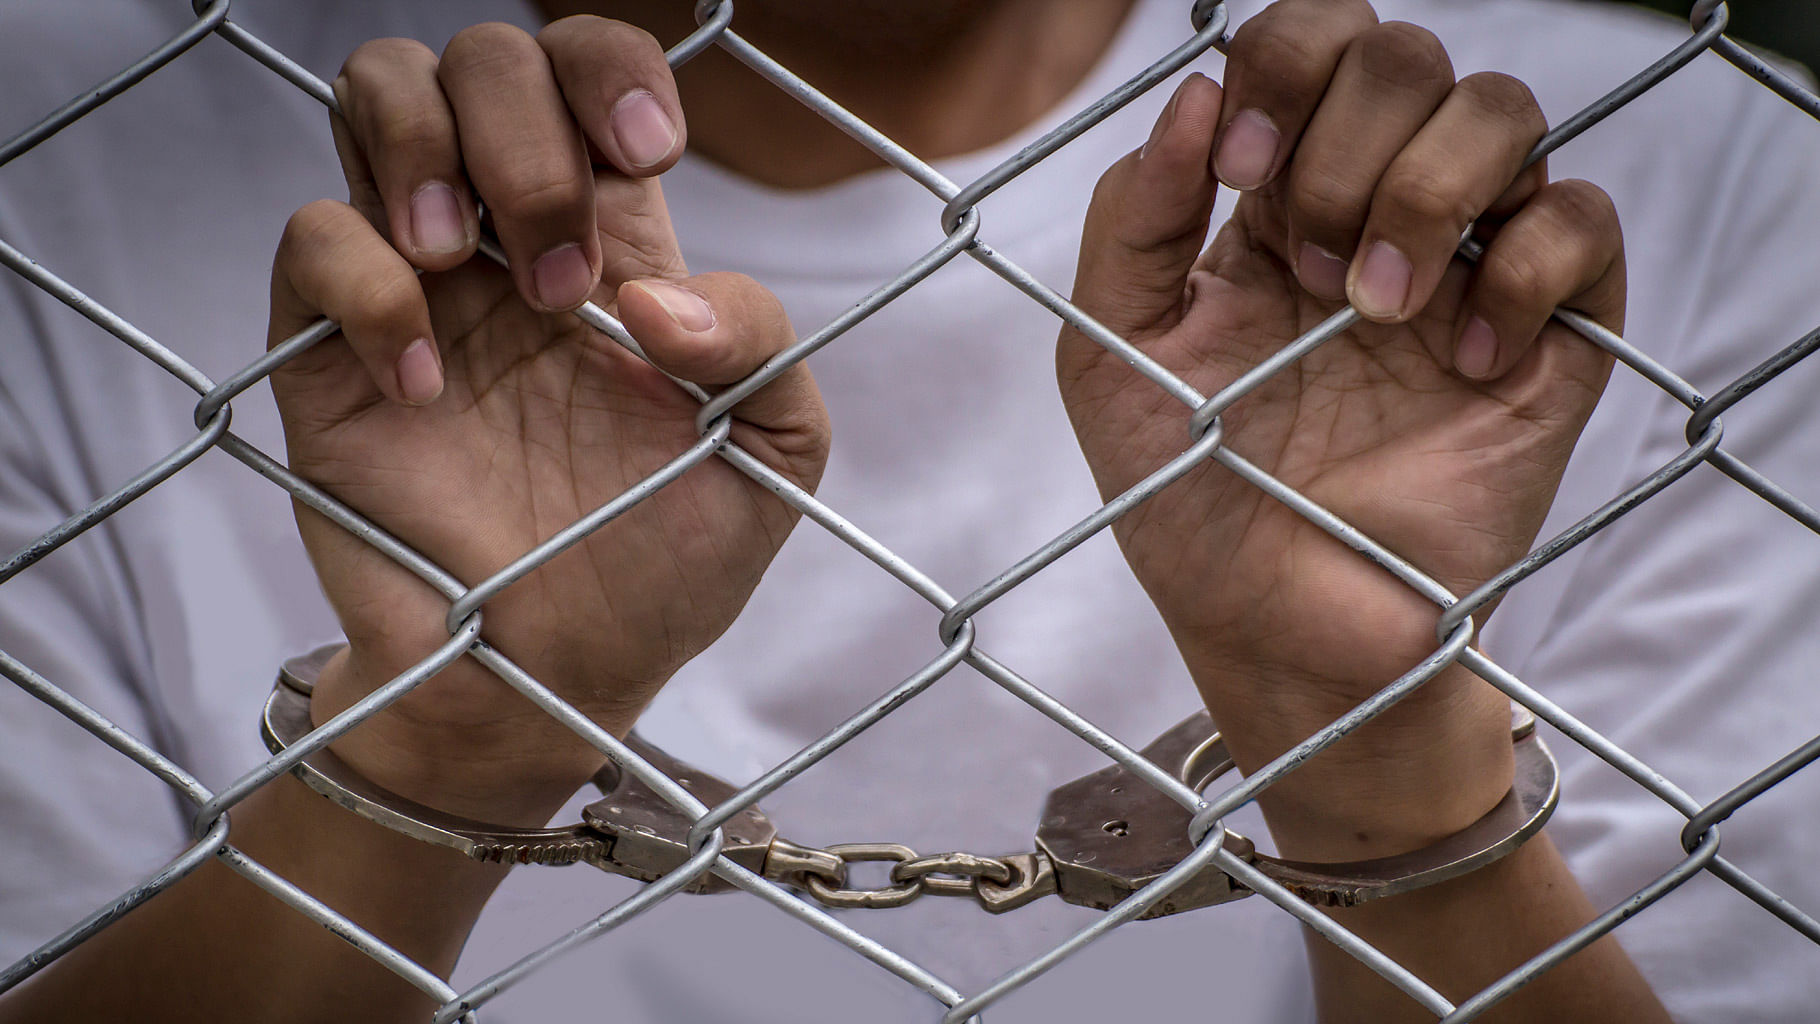 Prisoners of the Nabha Jail in Punjab are not so imprisoned. Find out why. (Photo Courtesy: iStockphoto)